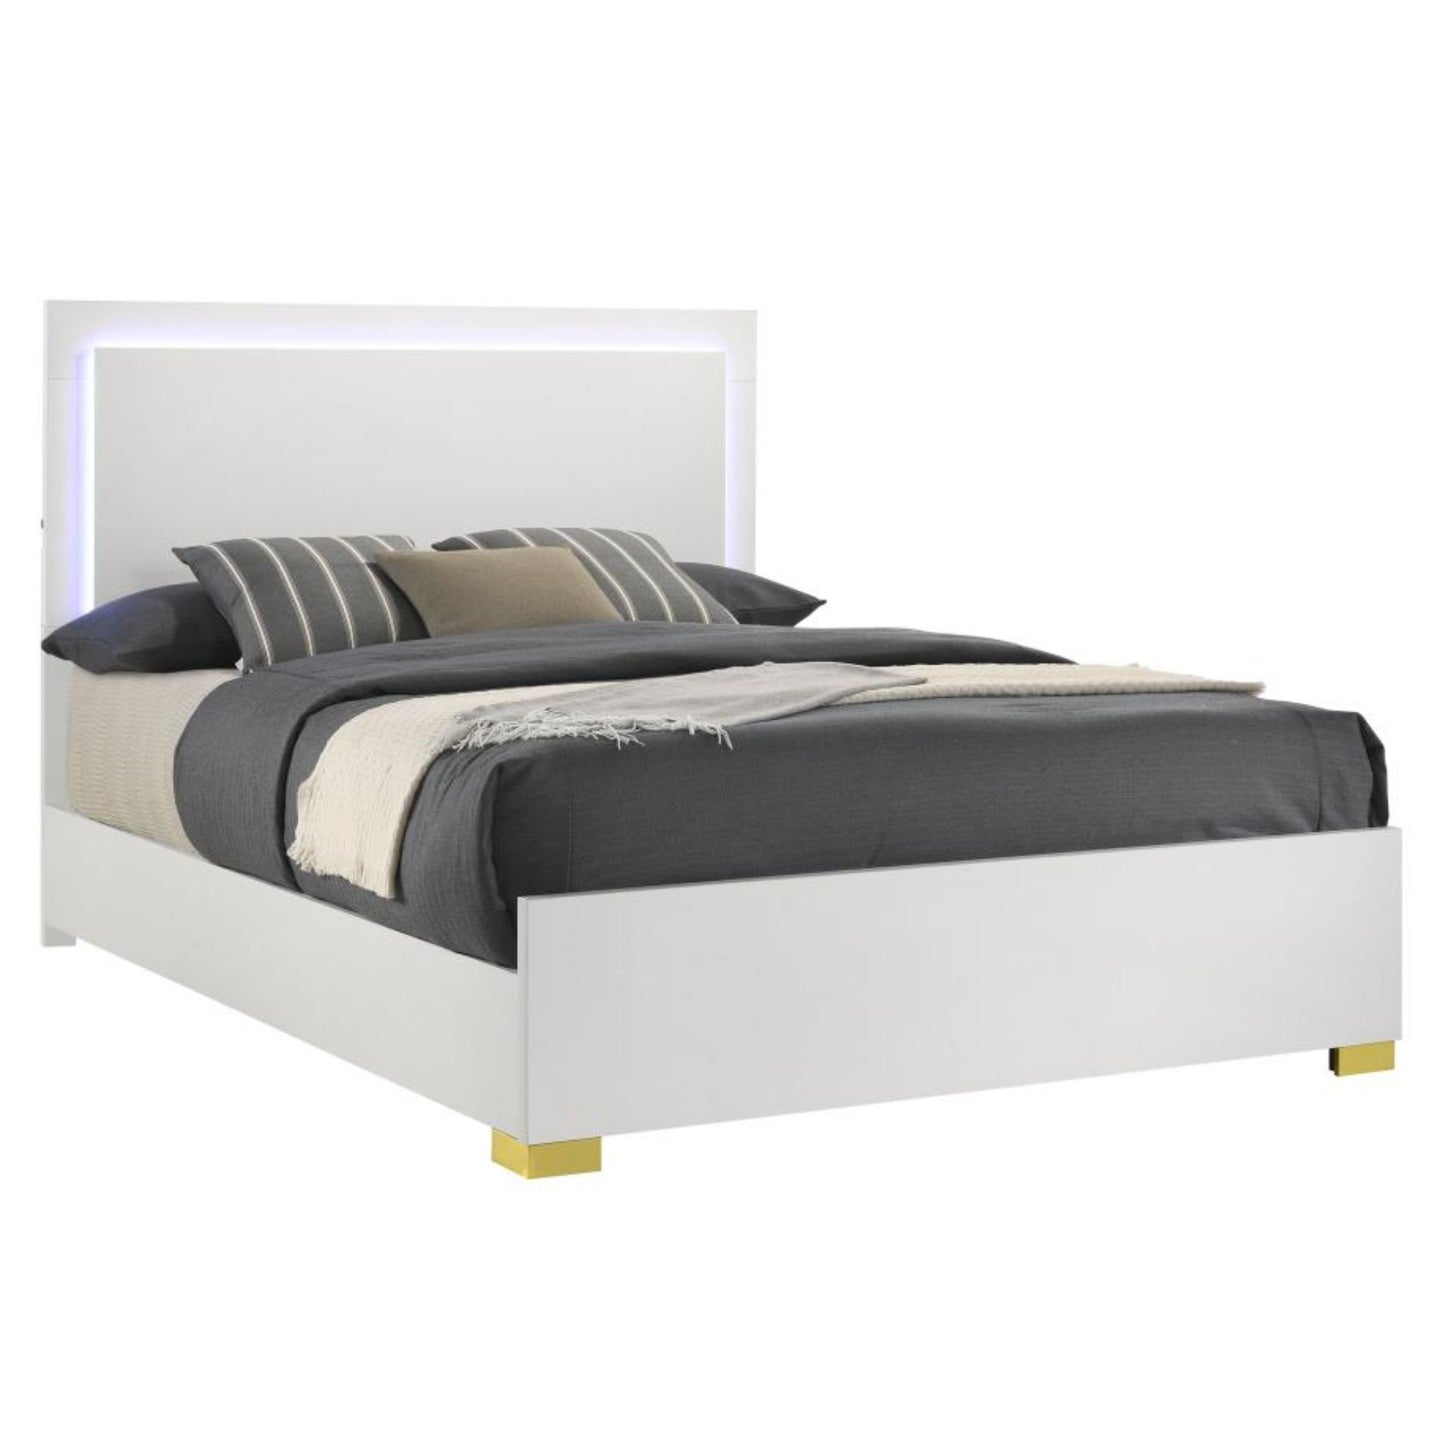 MARCELINE 5-piece Queen Bedroom Set with LED Headboard White